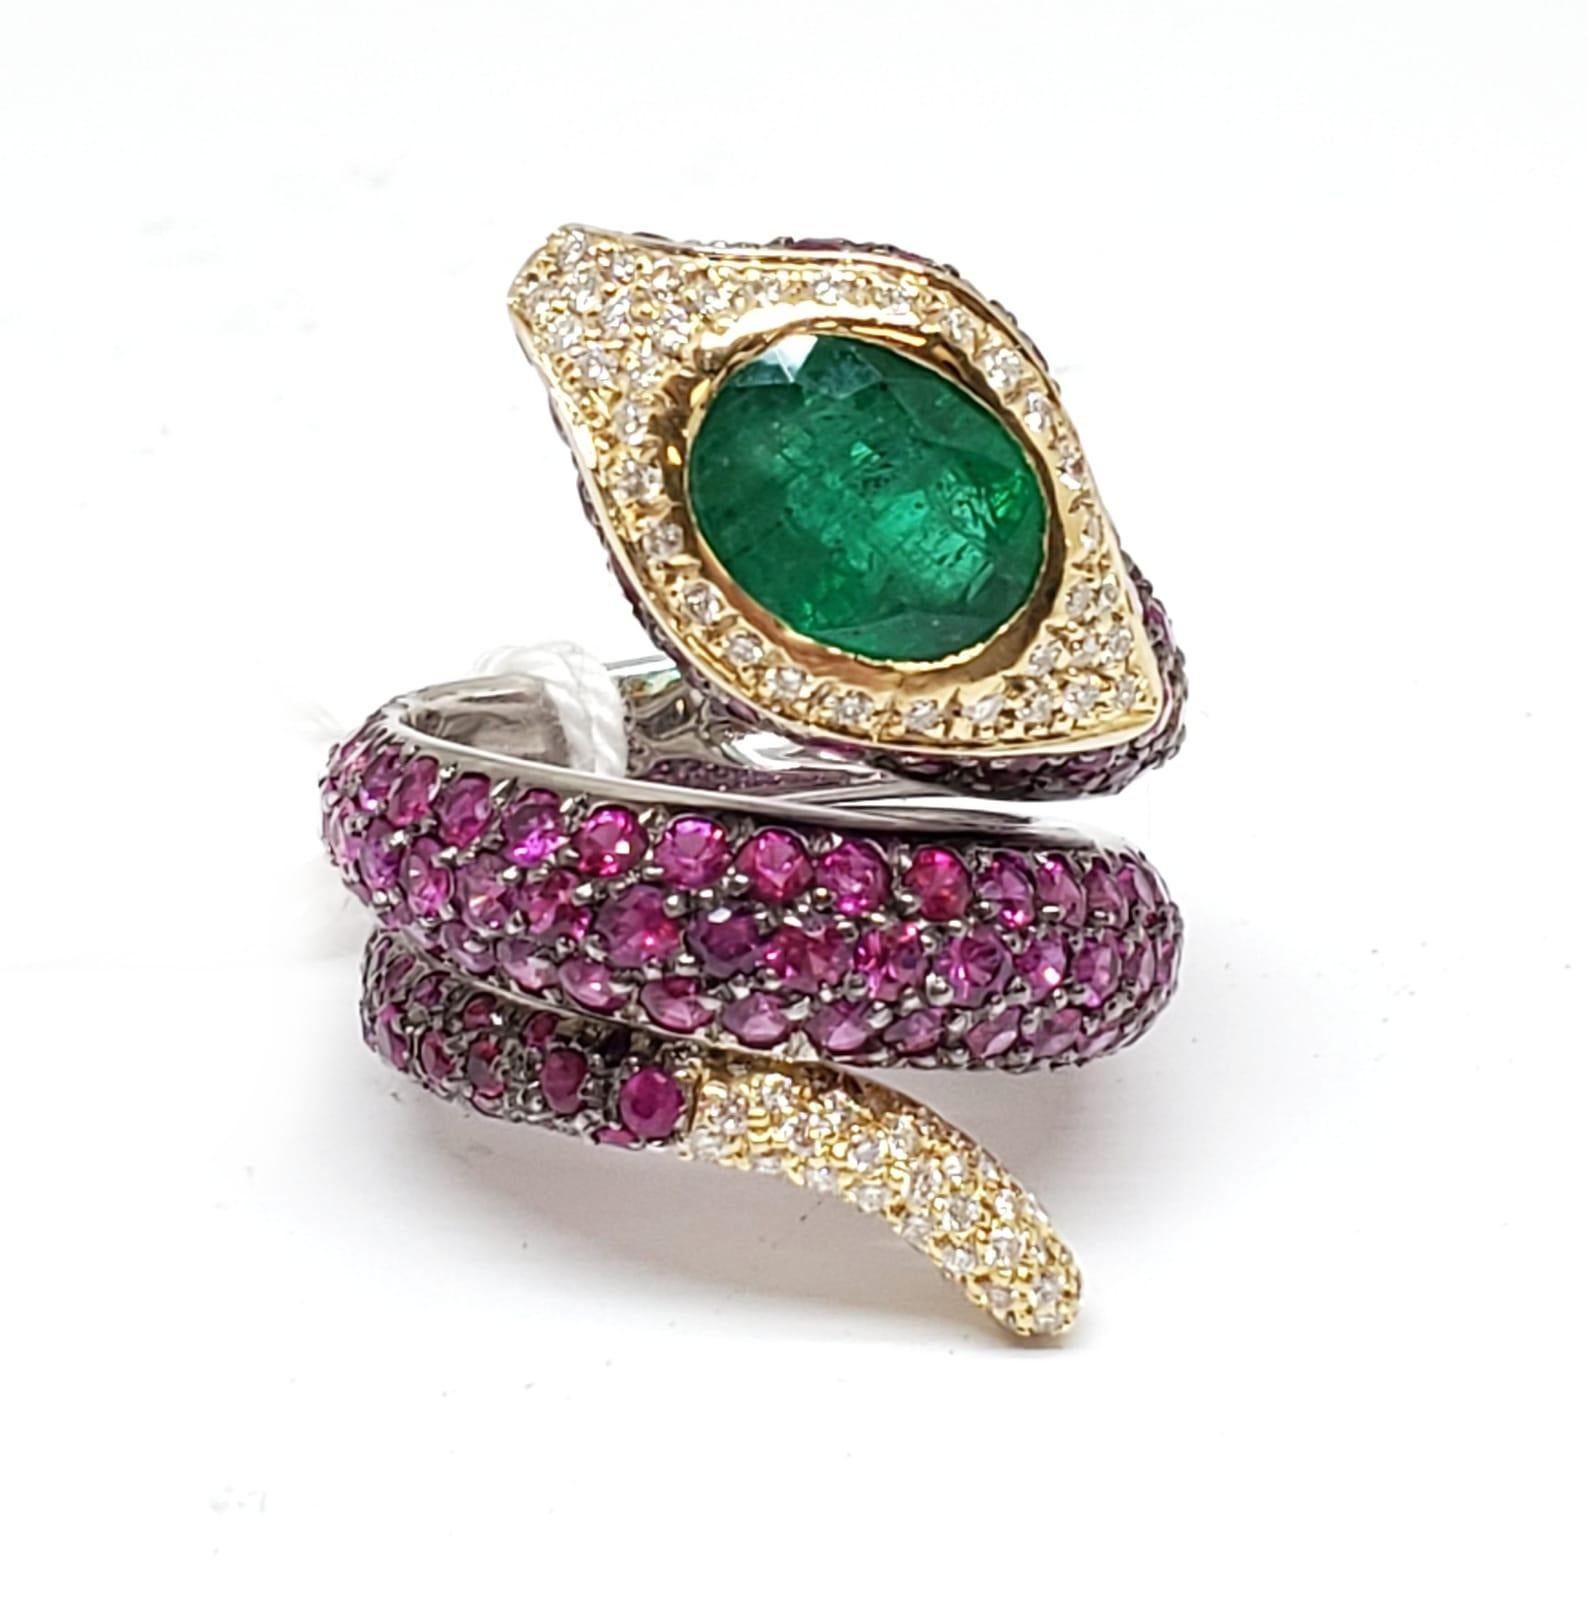 Andreoli Diamond Emerald Pink Sapphire 18 Karat Two-Tone Gold Serpent Ring

This ring features:
- 0.48 Carat Diamond
- 2.25 Carat Emerald
- 5.67 Carat Pink Sapphire
- 19.10 Gram 18K Two-Tone Gold
- Made In Italy